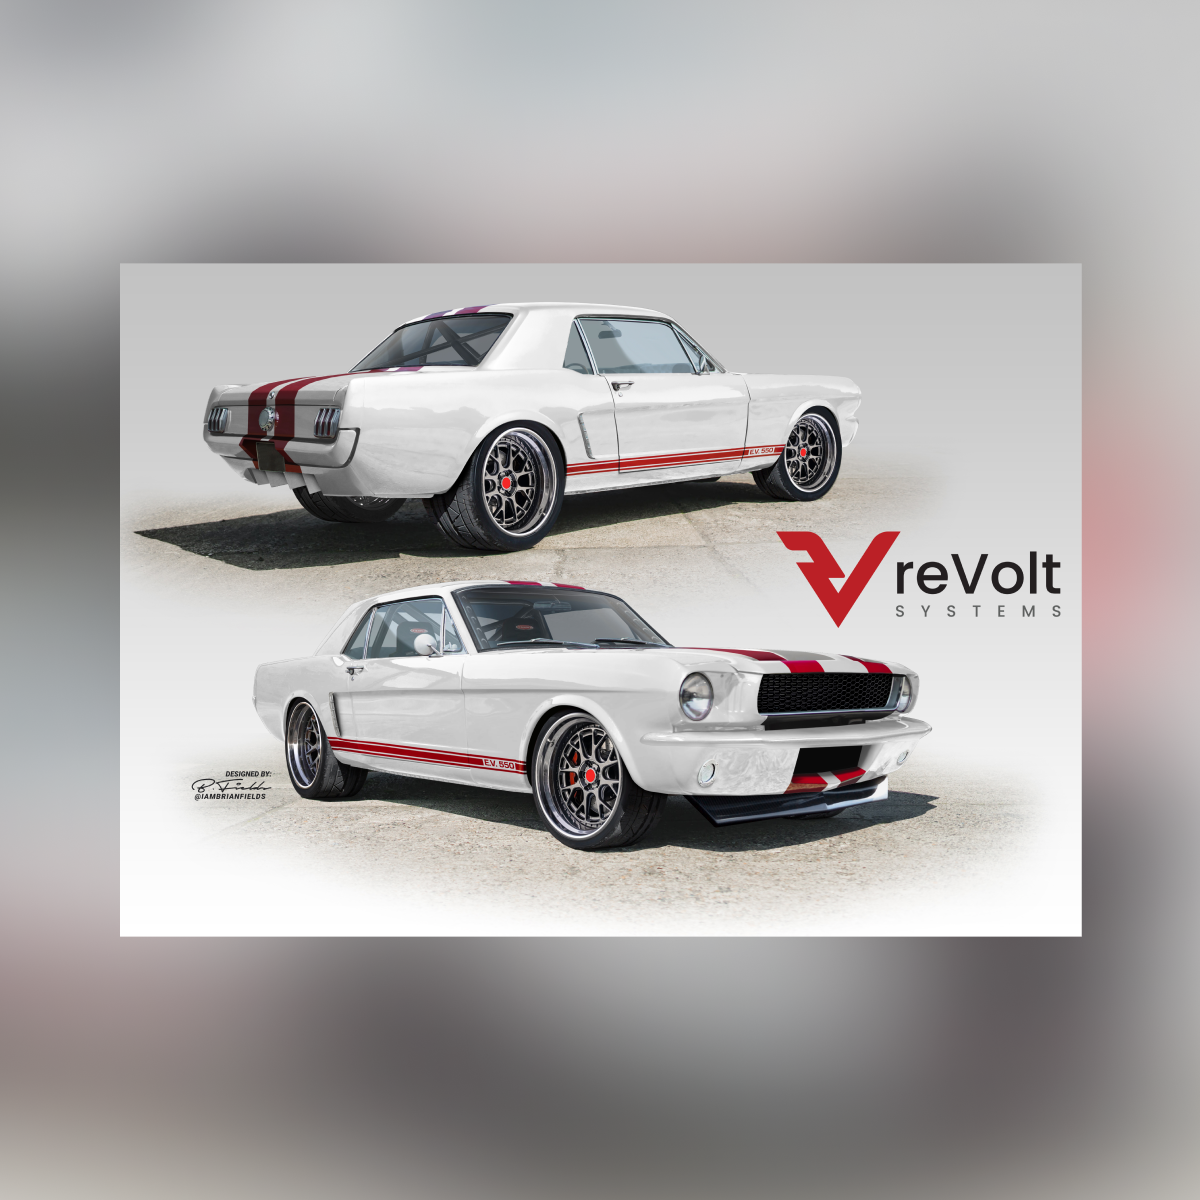 Legacy EV and Revolt Systems Announce Industry Leading Partnership